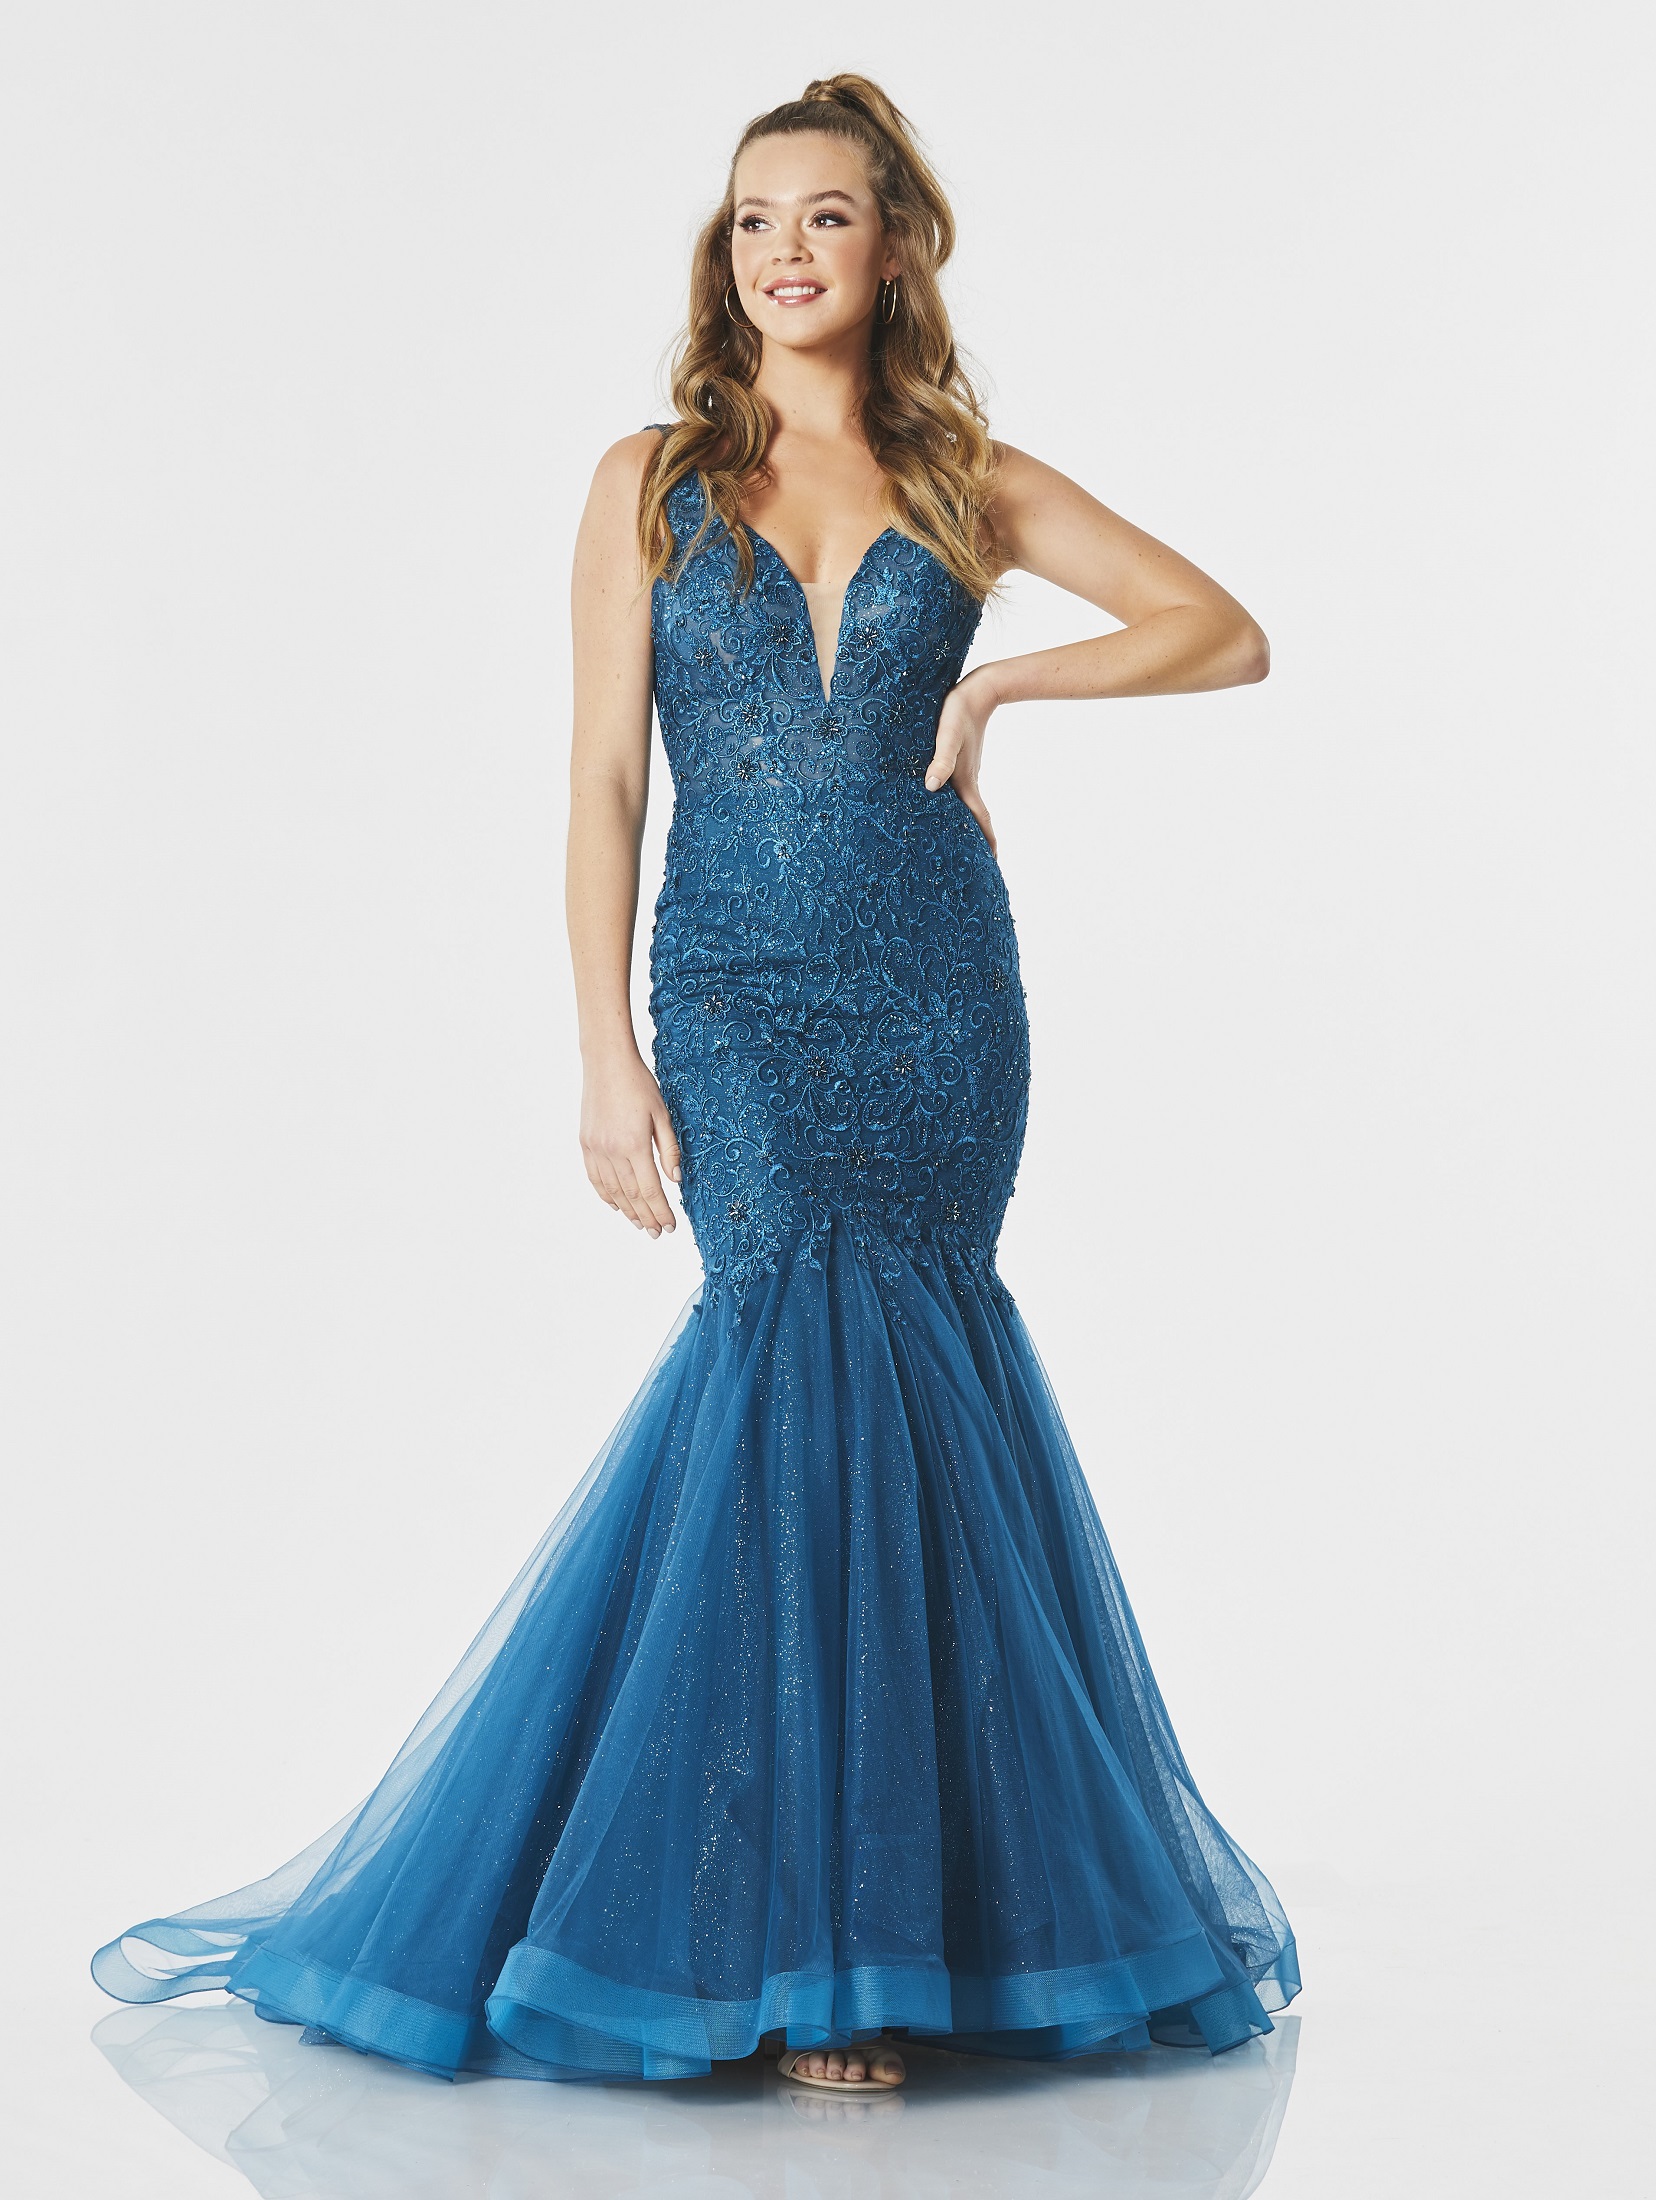 Fishtail Prom Dress - REDUCED at Ball Gown Heaven